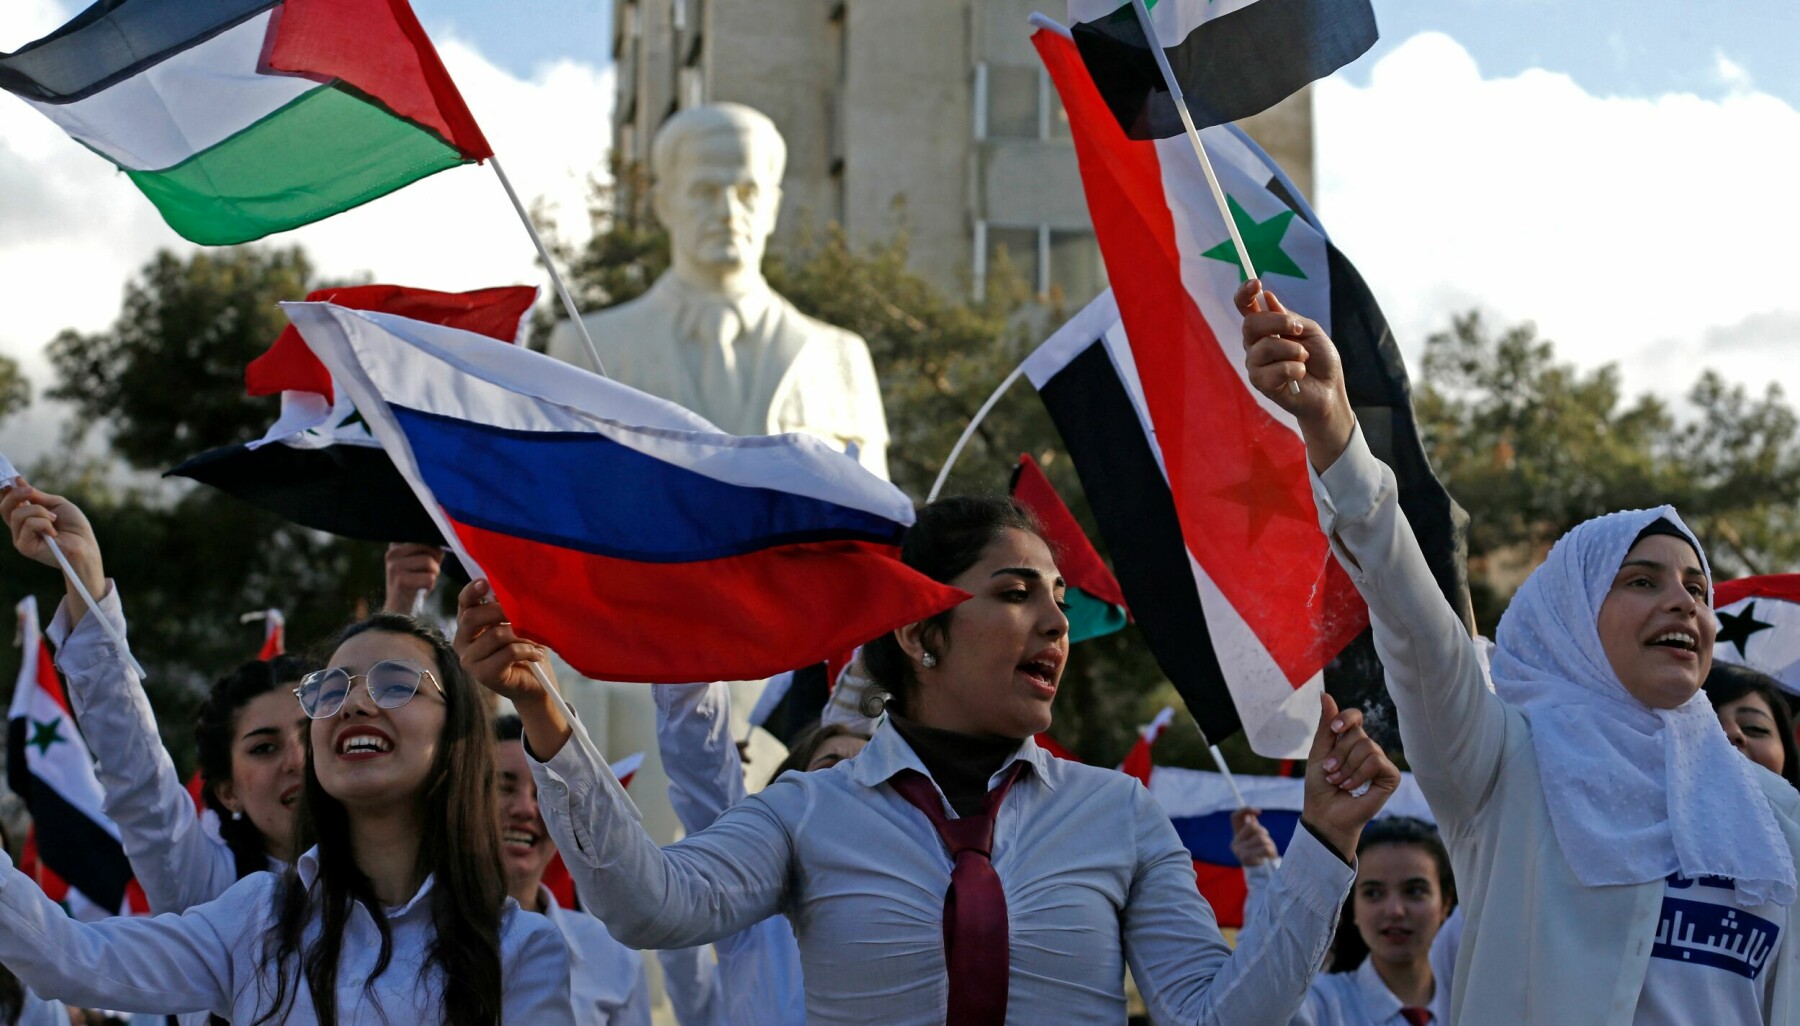 Students wave flags as they gather in support of Russia following the Russian invasion of Ukraine, at the university of Damascus in the Syrian capital, on March 9, 2022. (Photo by LOUAI BESHARA / AFP)